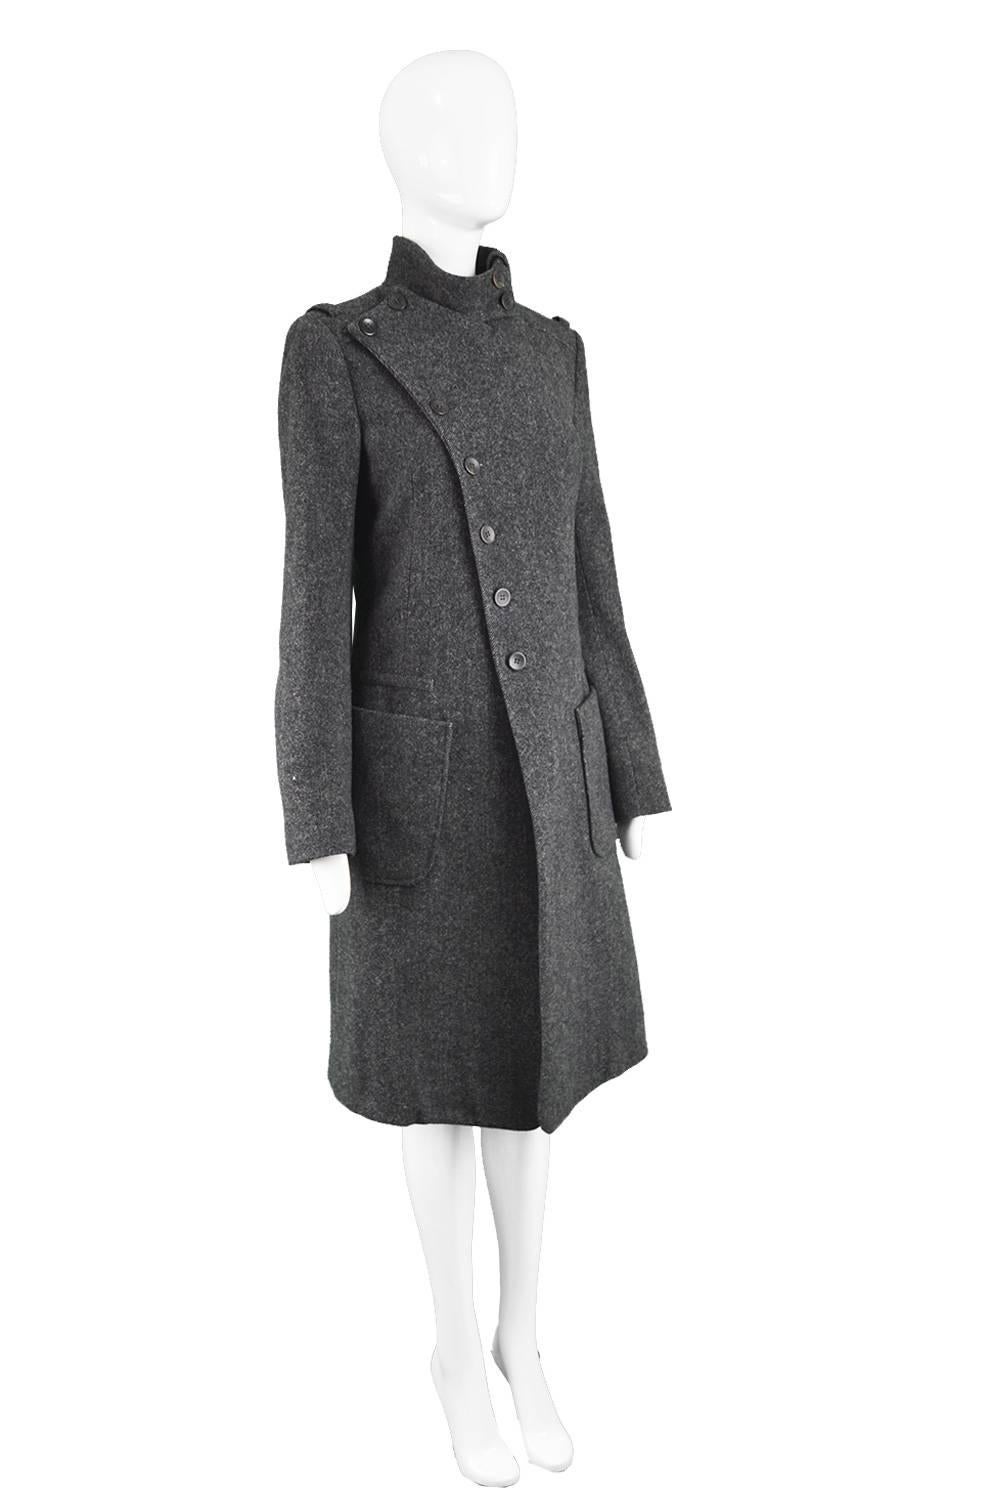 Balenciaga Nicolas Ghesquiere Gray Wool and Cashmere Military Style Coat, 2005 2